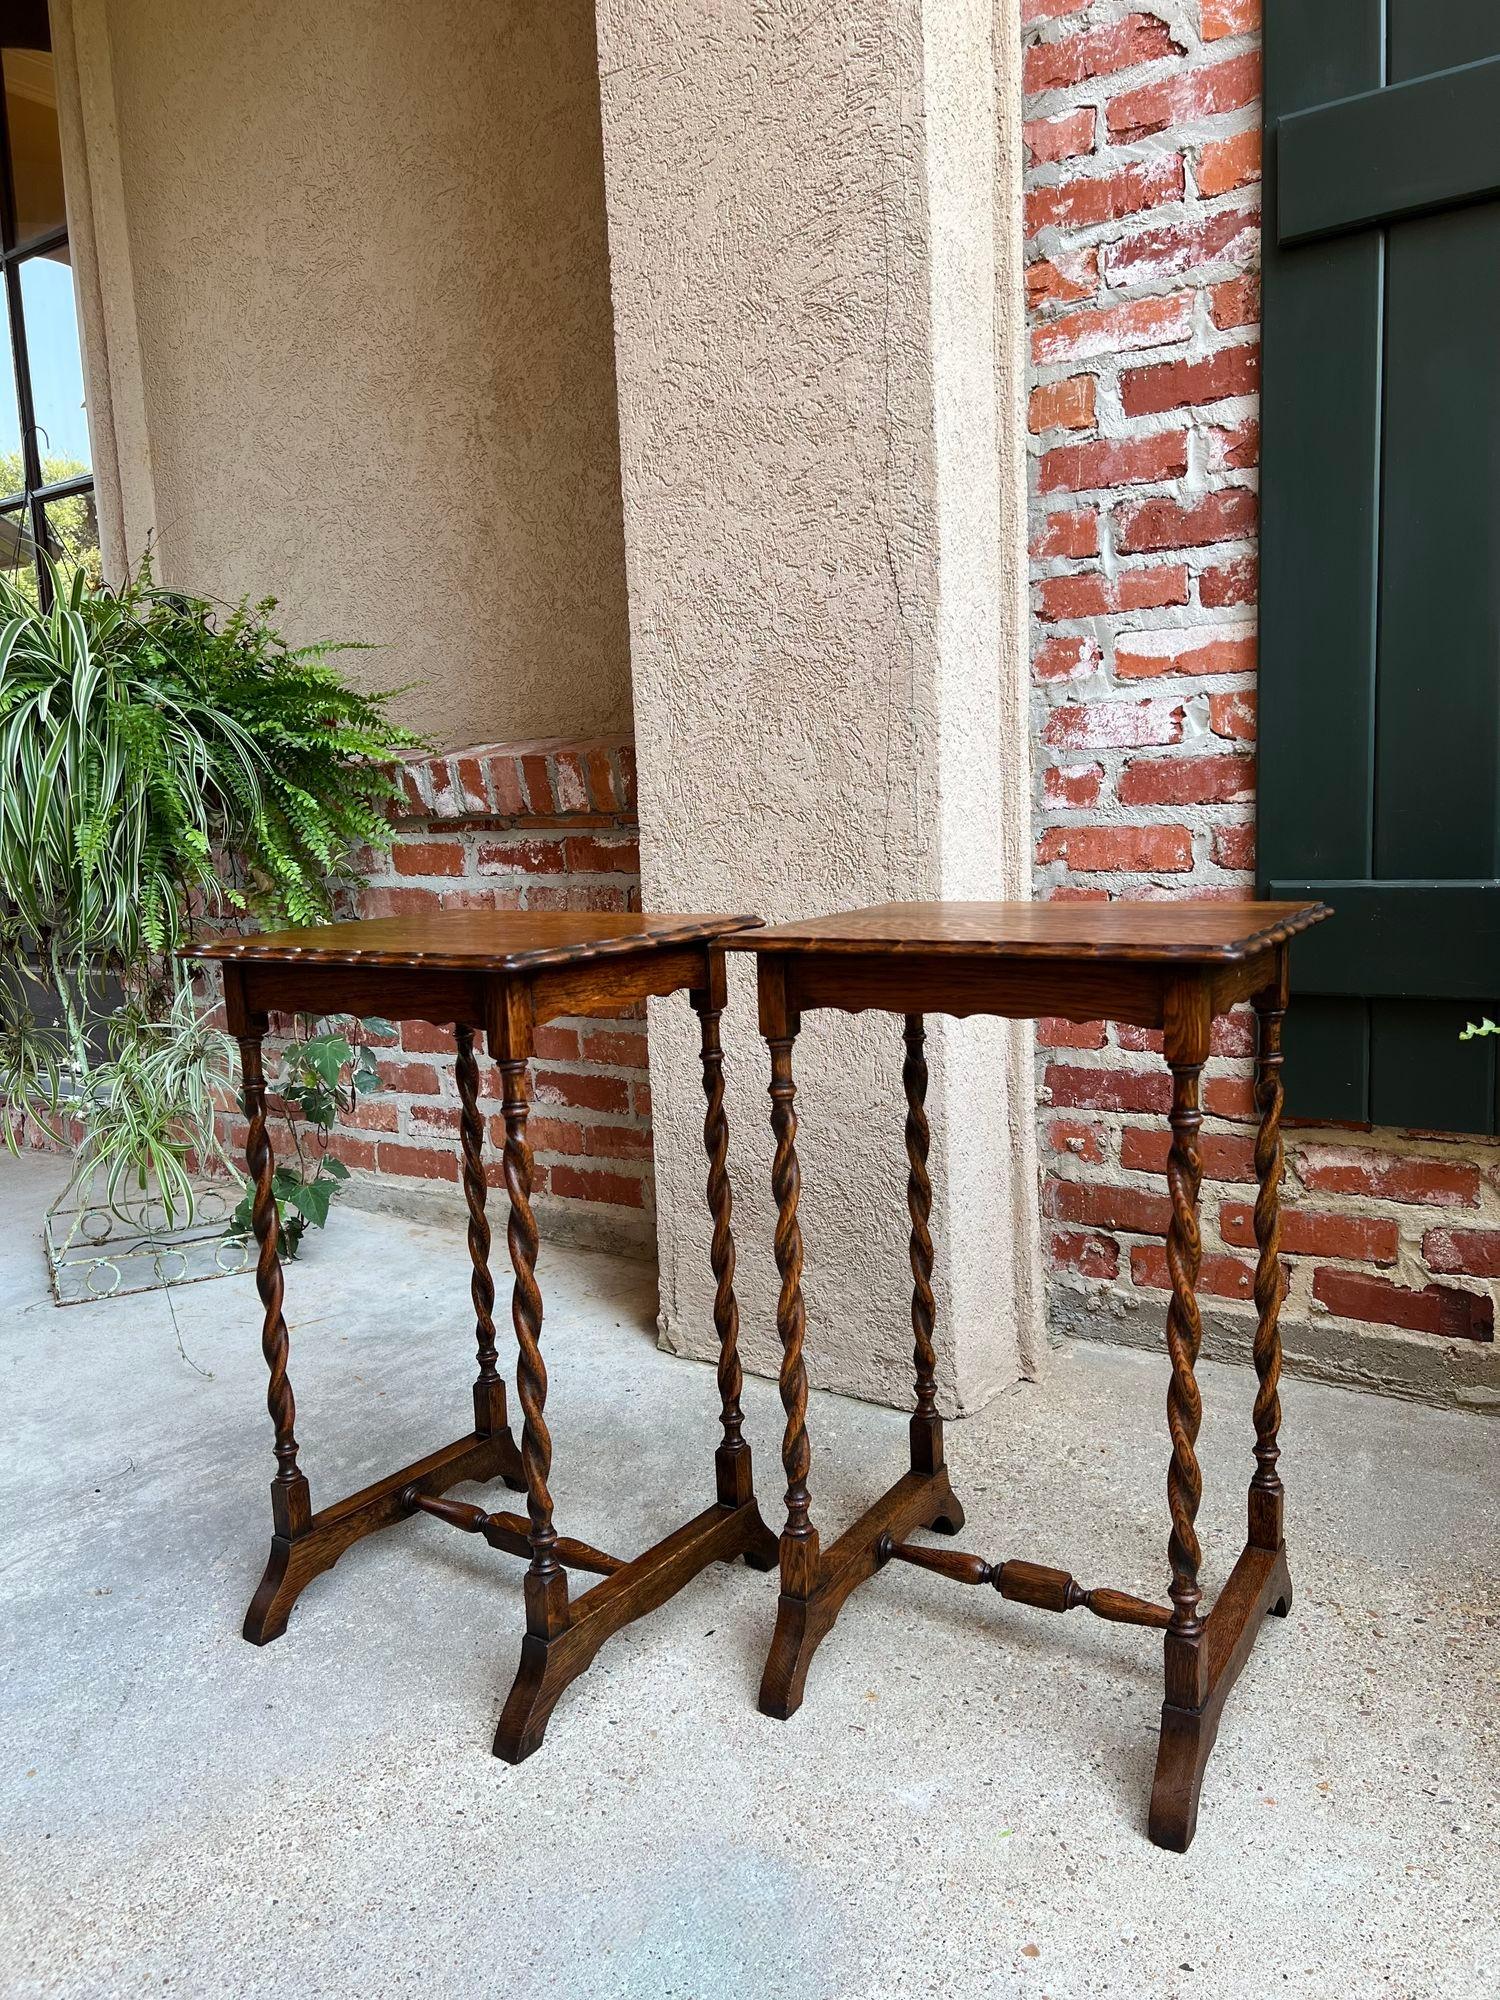 PAIR Antique English Sofa Side Table Barley Twist Square Tiger Oak PETITE Set of 2.

Direct from England, a fabulous pair of antique English side or lamp tables! The tables are a petite size, with excellent details. The English tiger oak grain